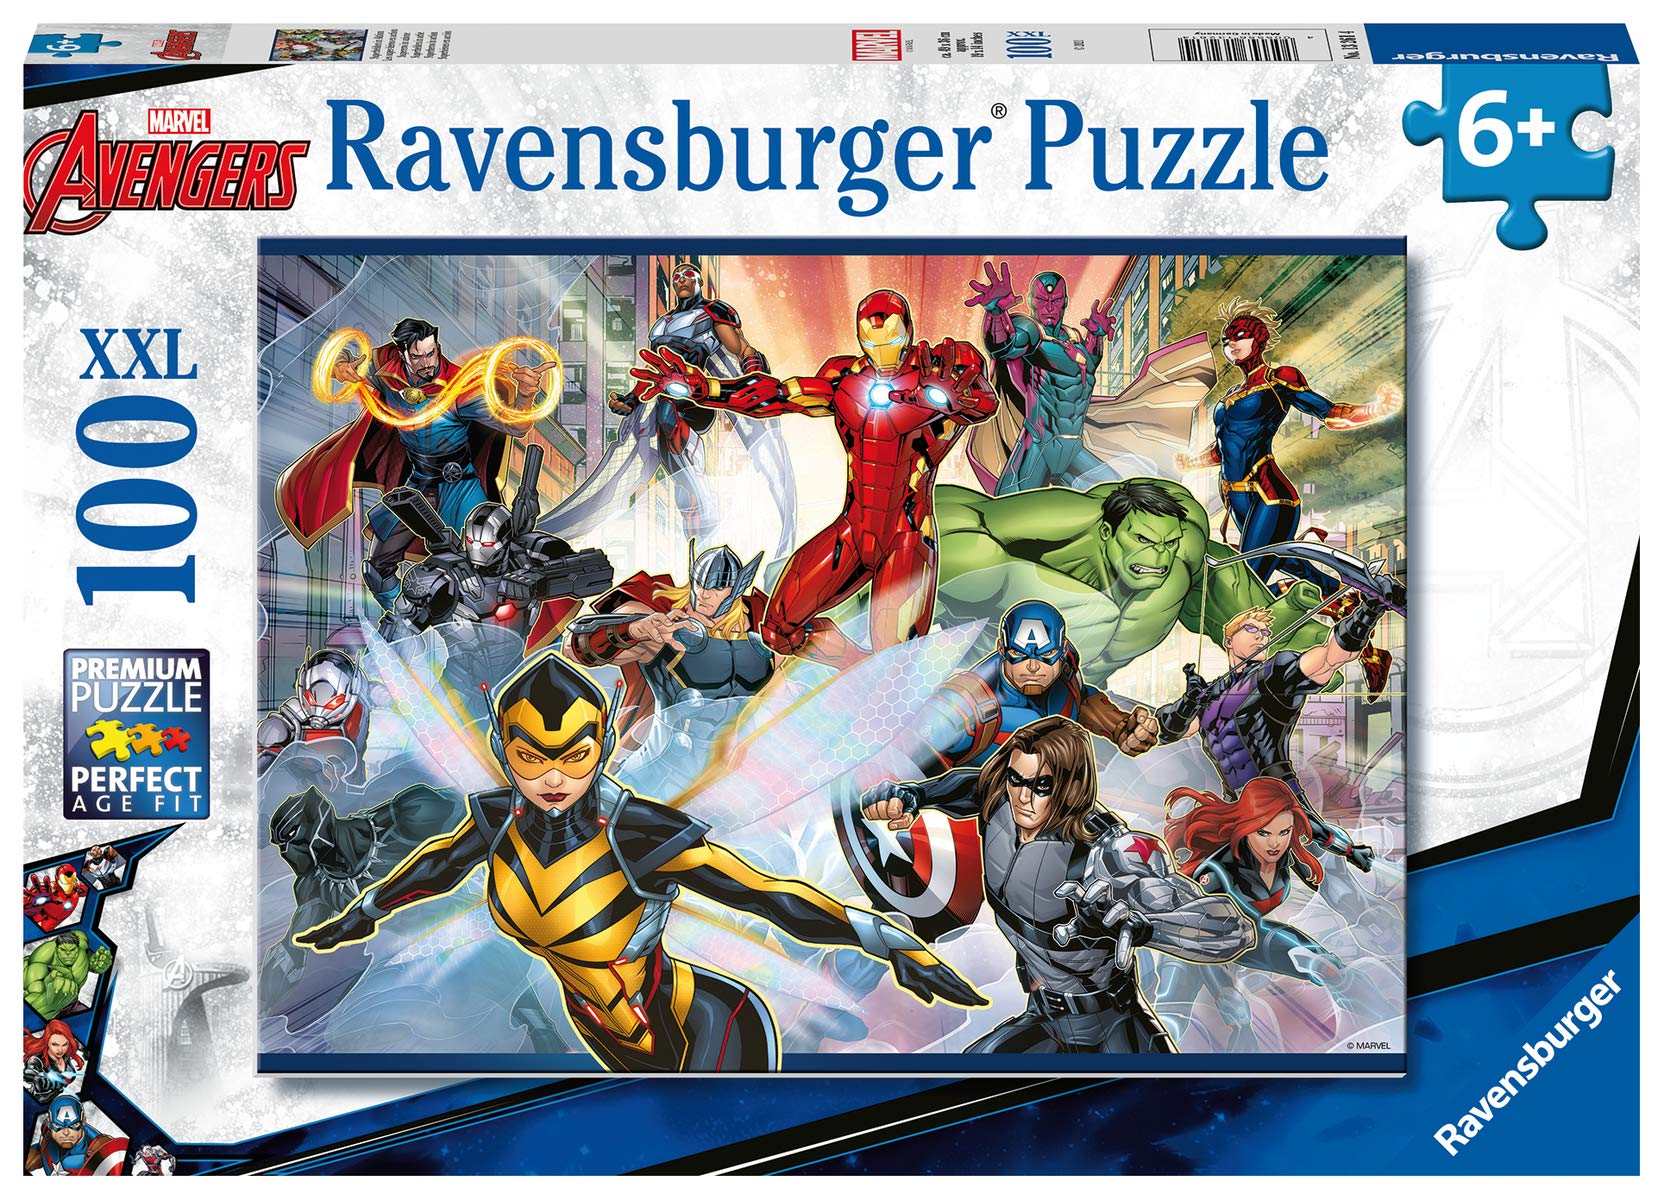 Ravensburger Marvel Avengers 100 Piece Jigsaw Puzzle for Kids Age 6 Years Up